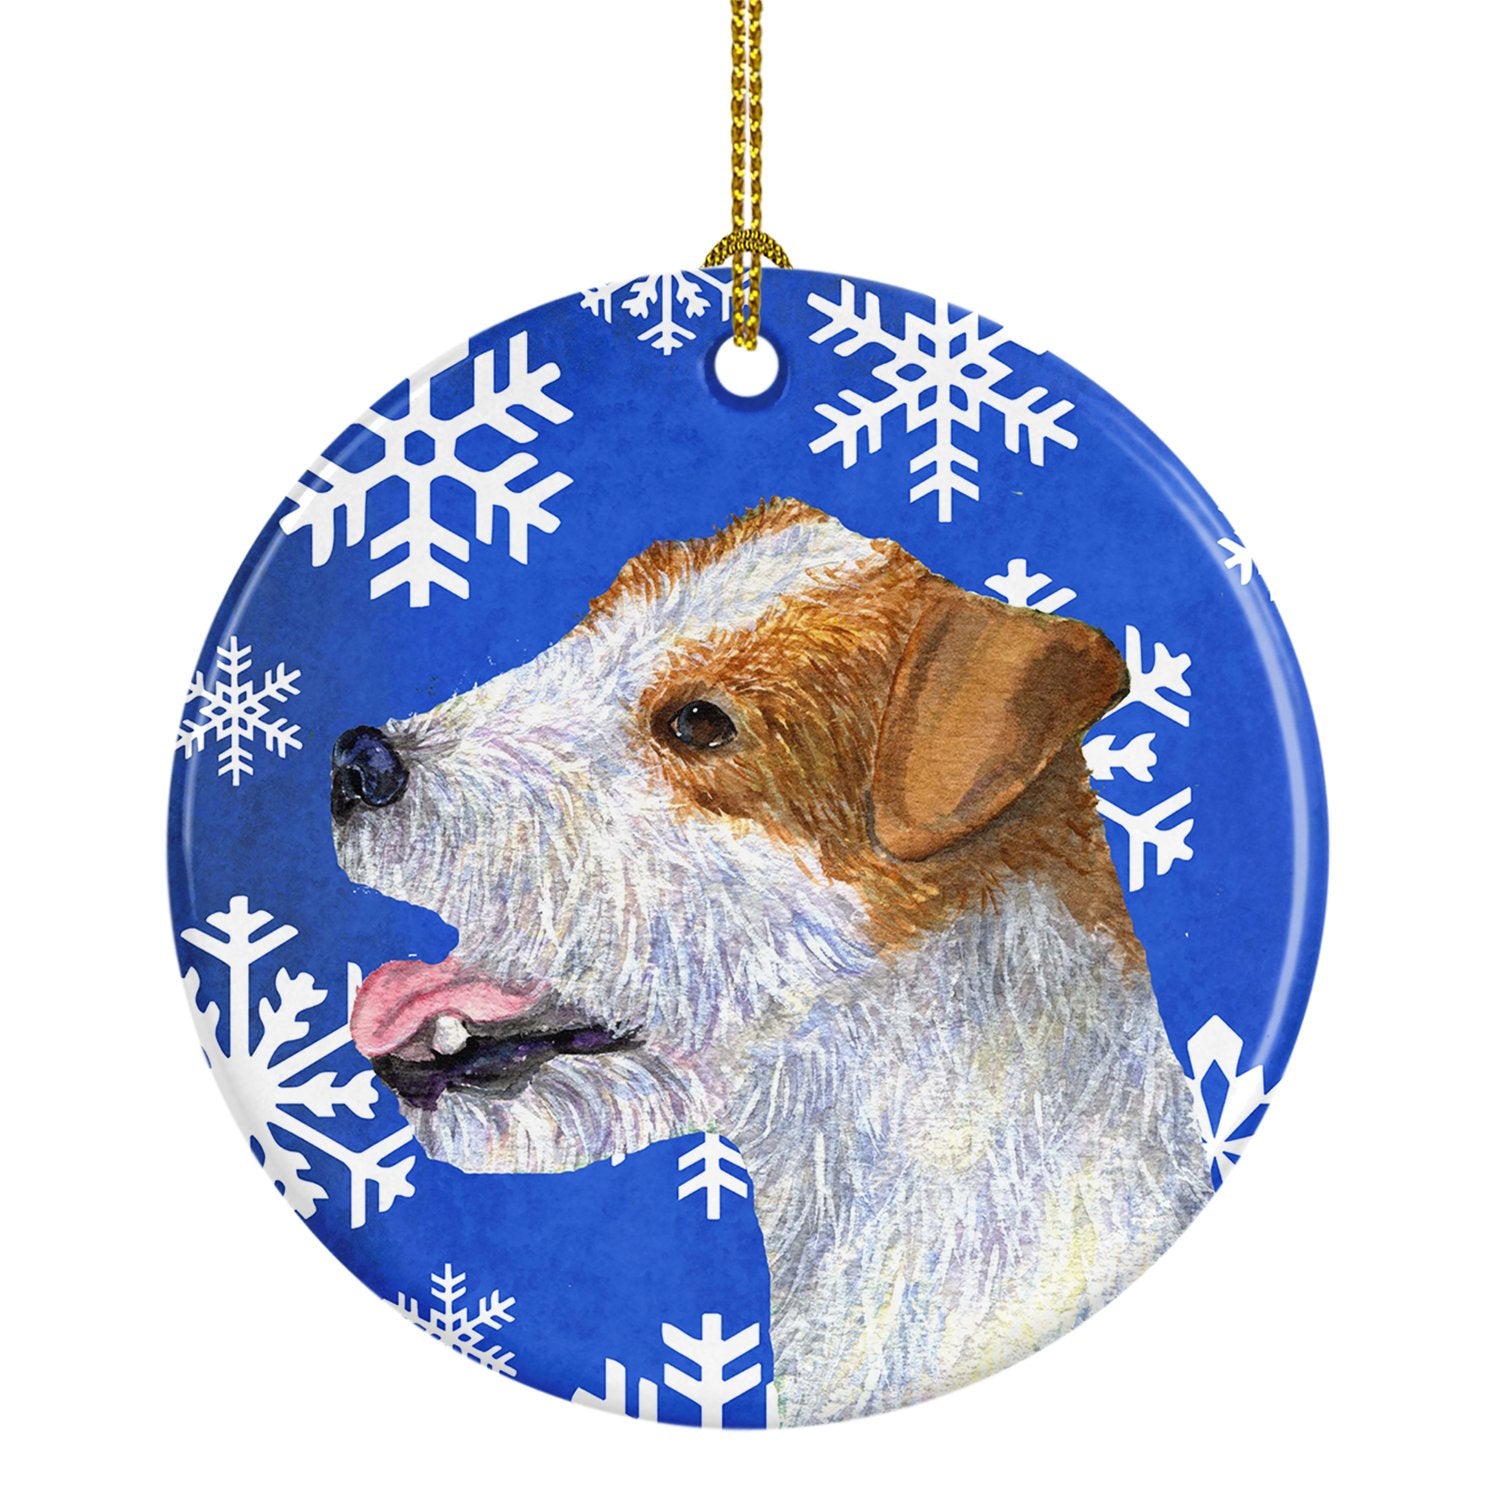 Jack Russell Terrier Winter Snowflakes Holiday Christmas Ceramic Ornament by Caroline's Treasures